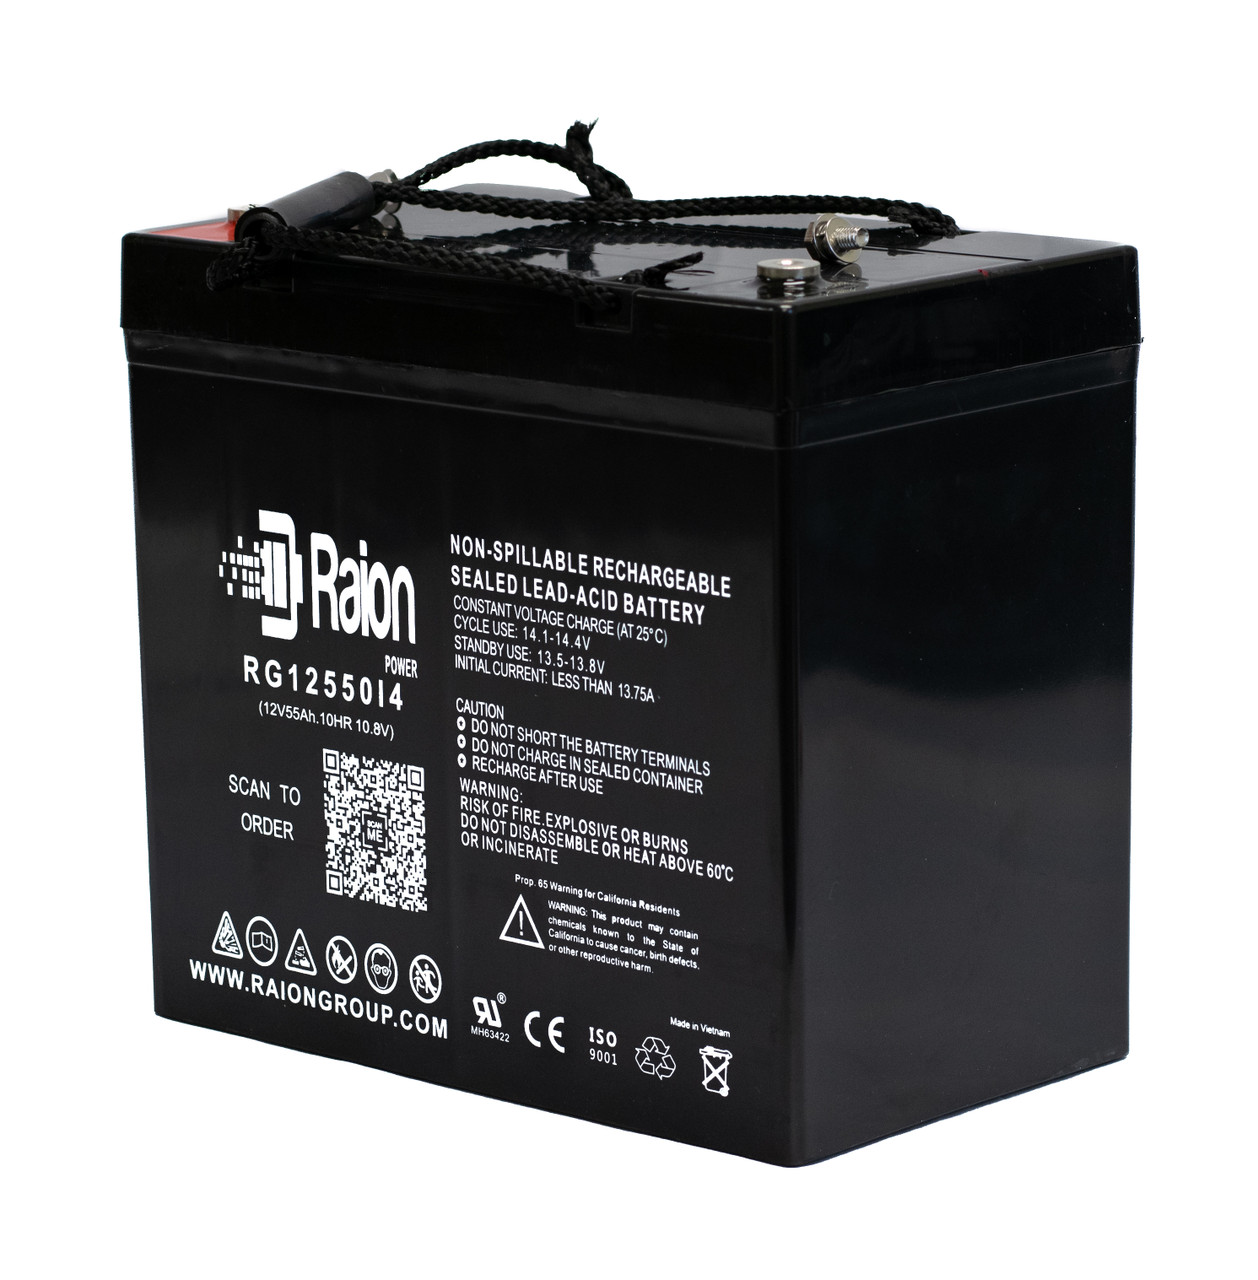 Raion Power 12V 55Ah 22NF Mobility Scooter Battery Replacement for Merits Health Products P314-3HD C